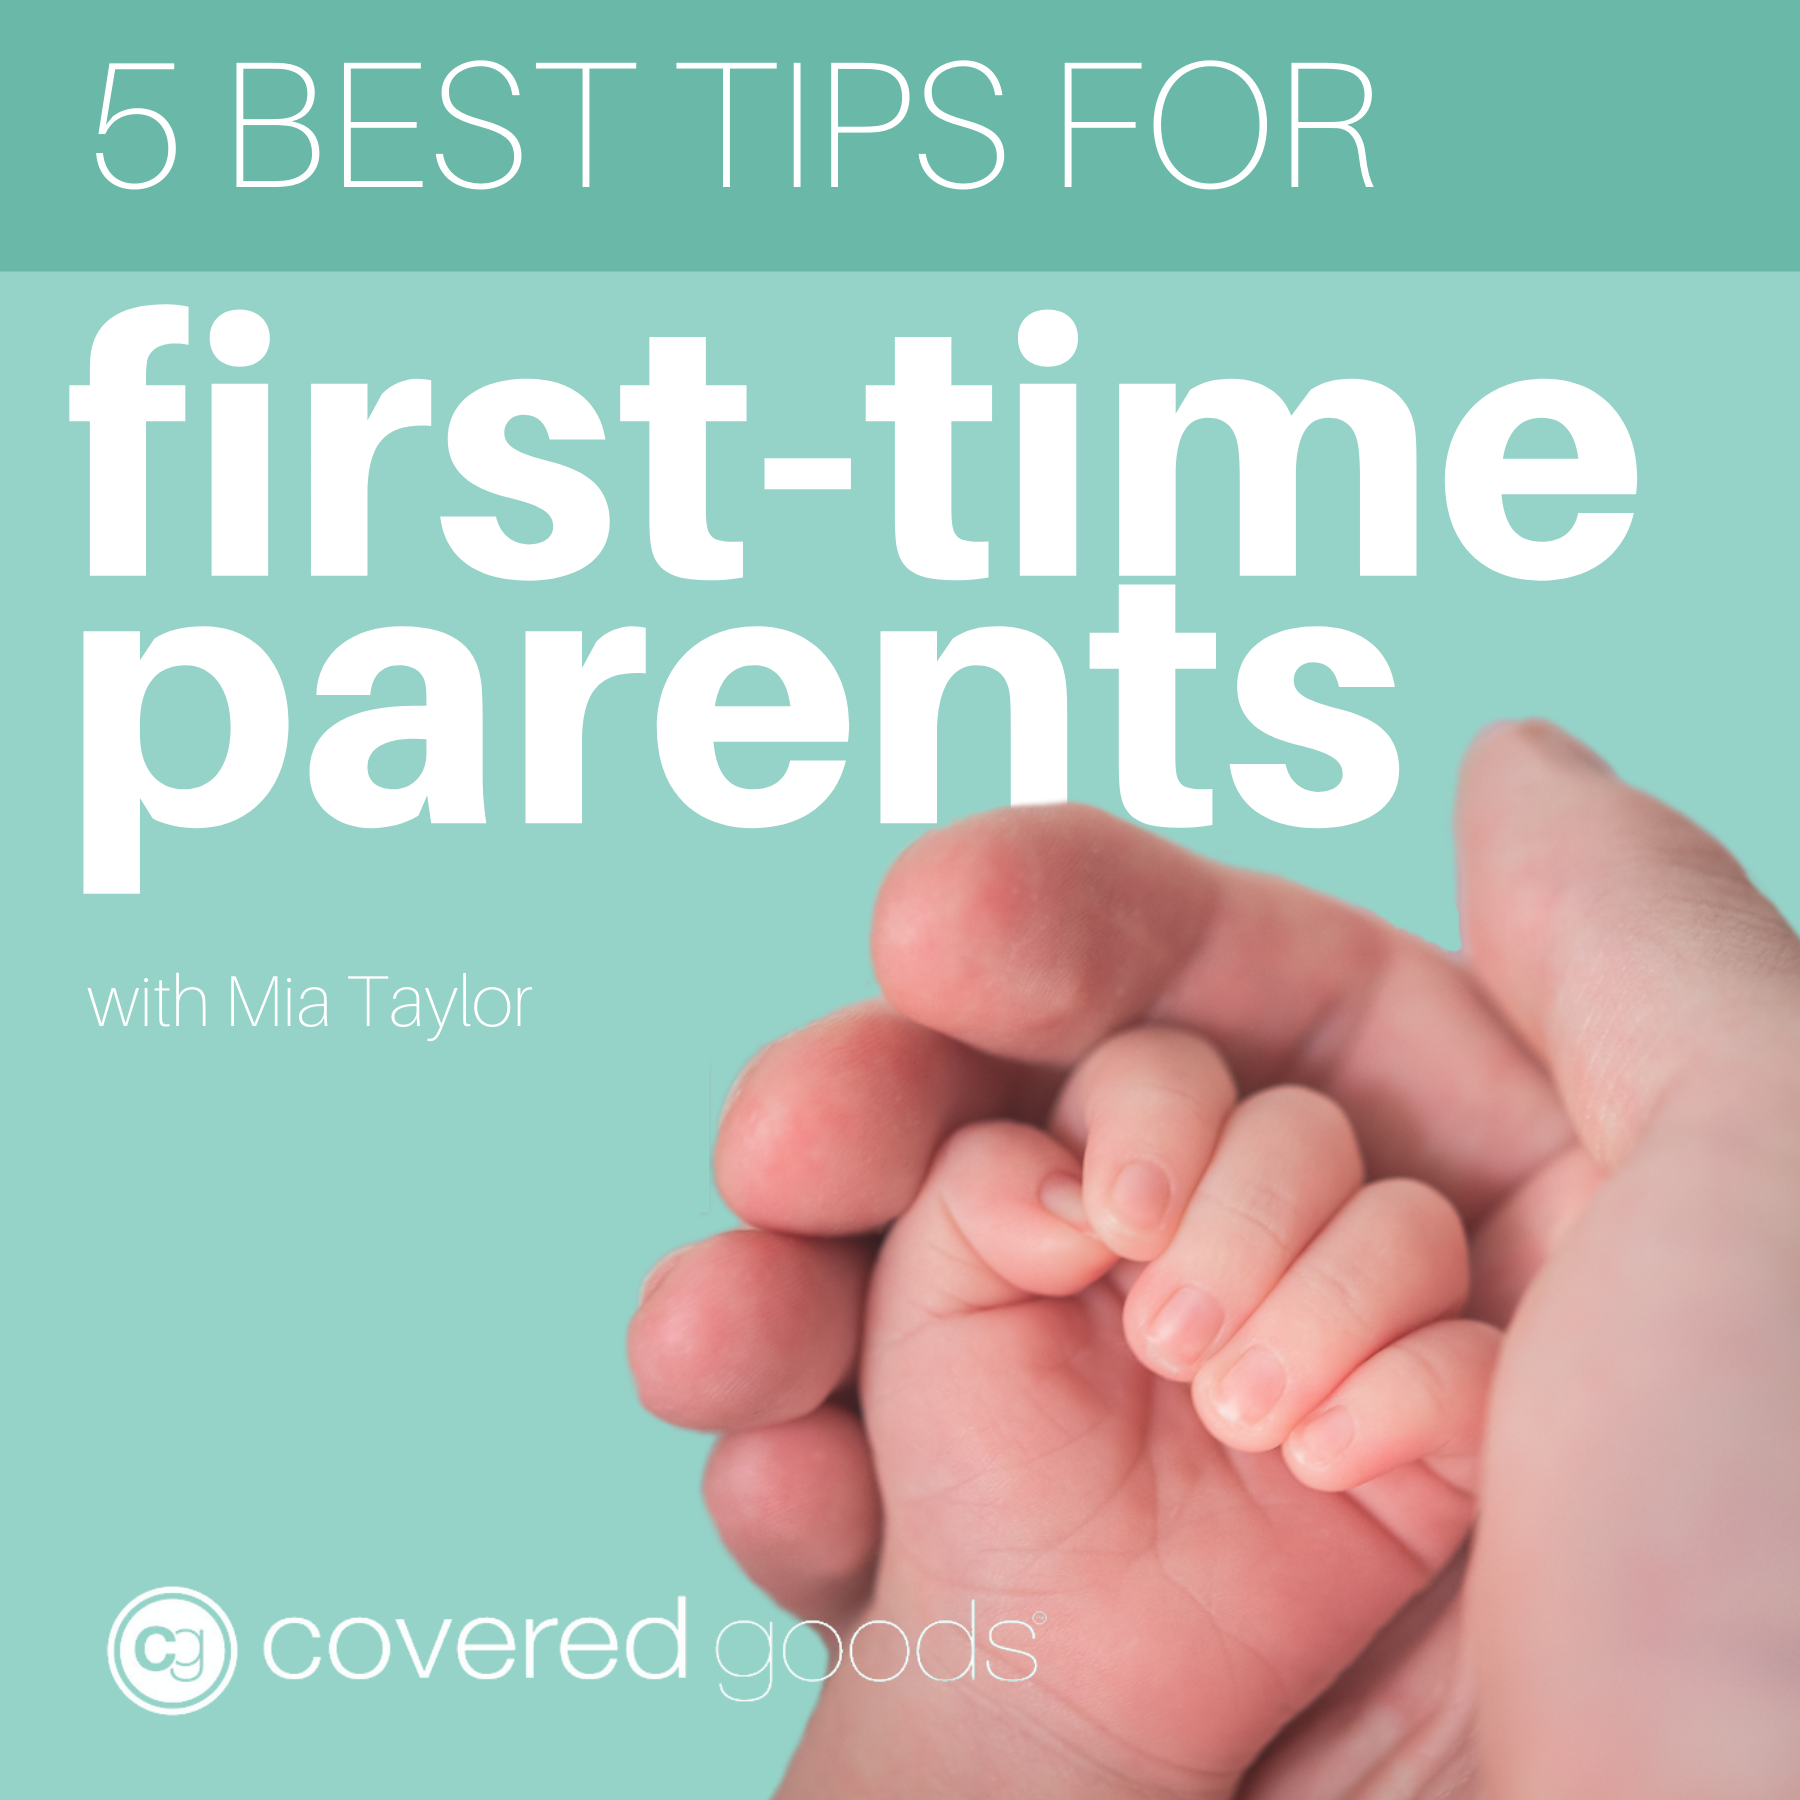 5 Best Tips for First-Time Parents